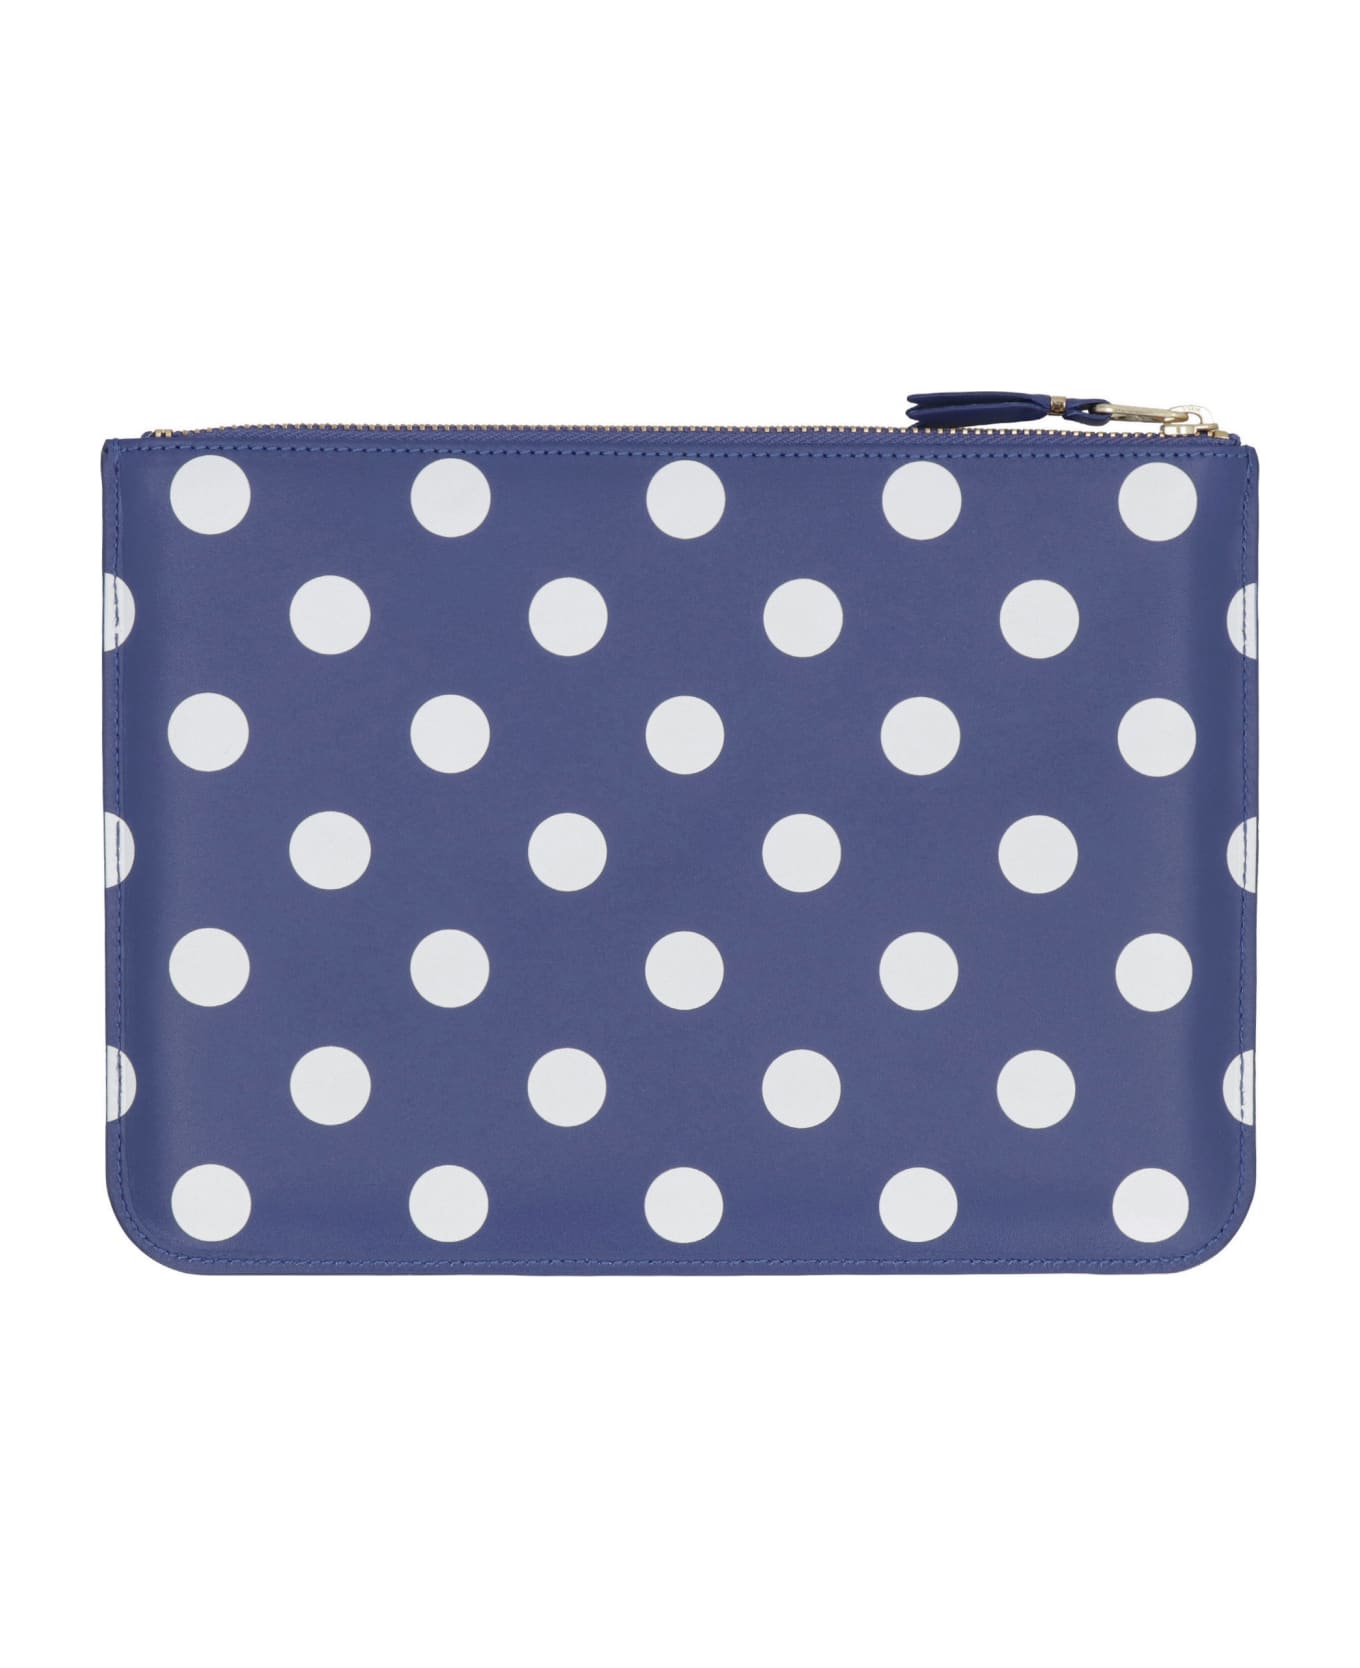 Comme des Garçons Wallet Printed Leather Flat Pouch - blue クラッチバッグ